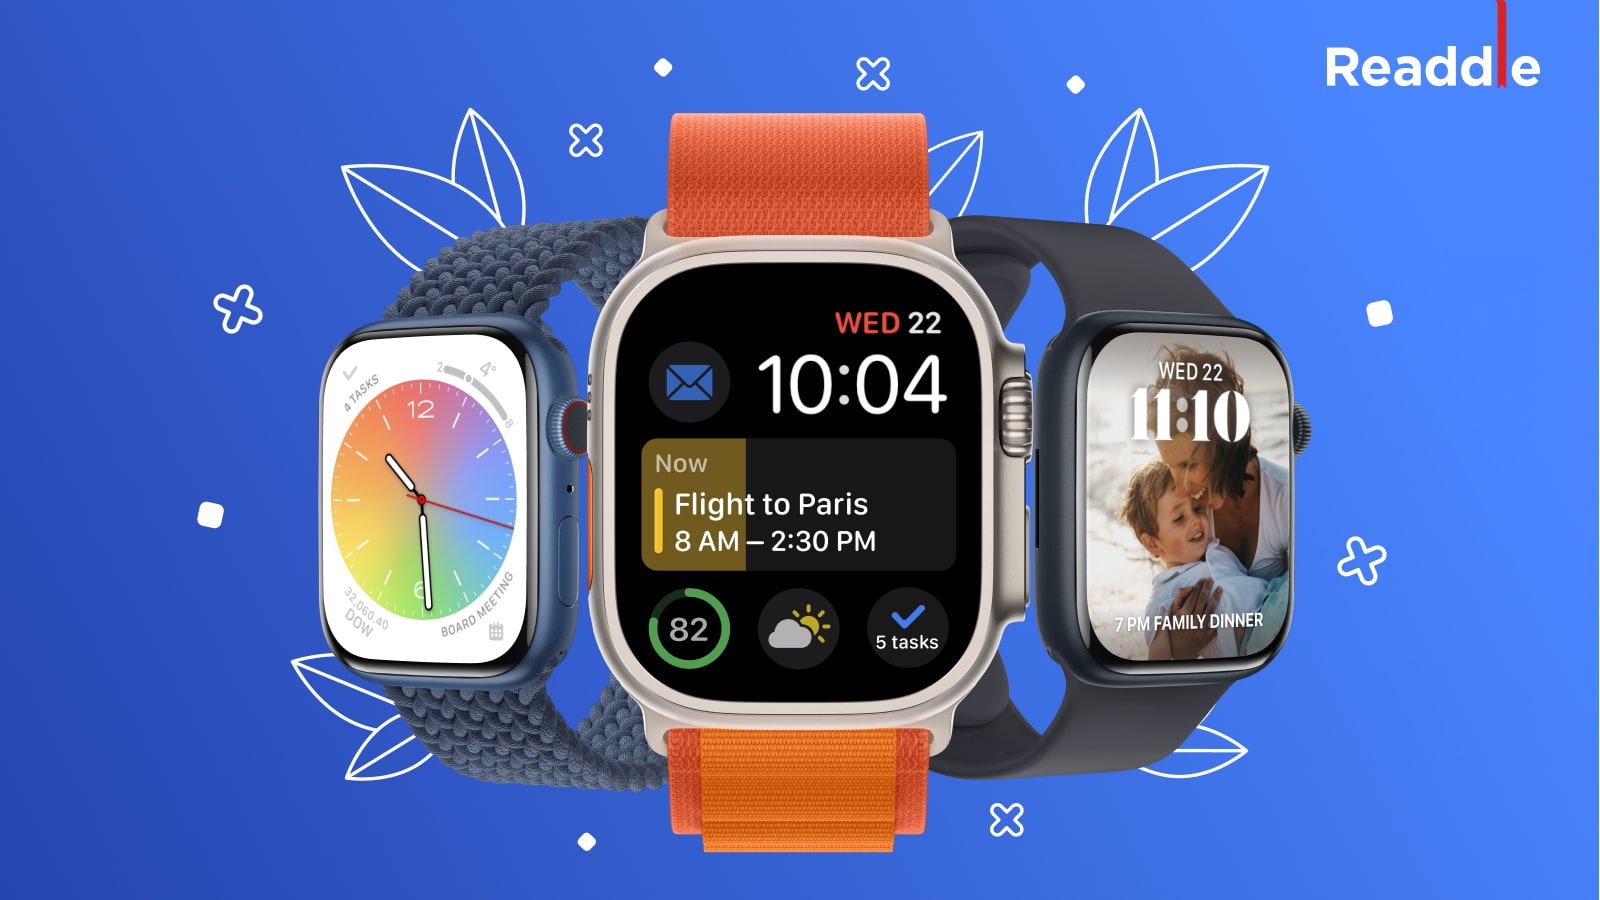 You can now create events on Apple Watch with Readdle’s updated Calendars app